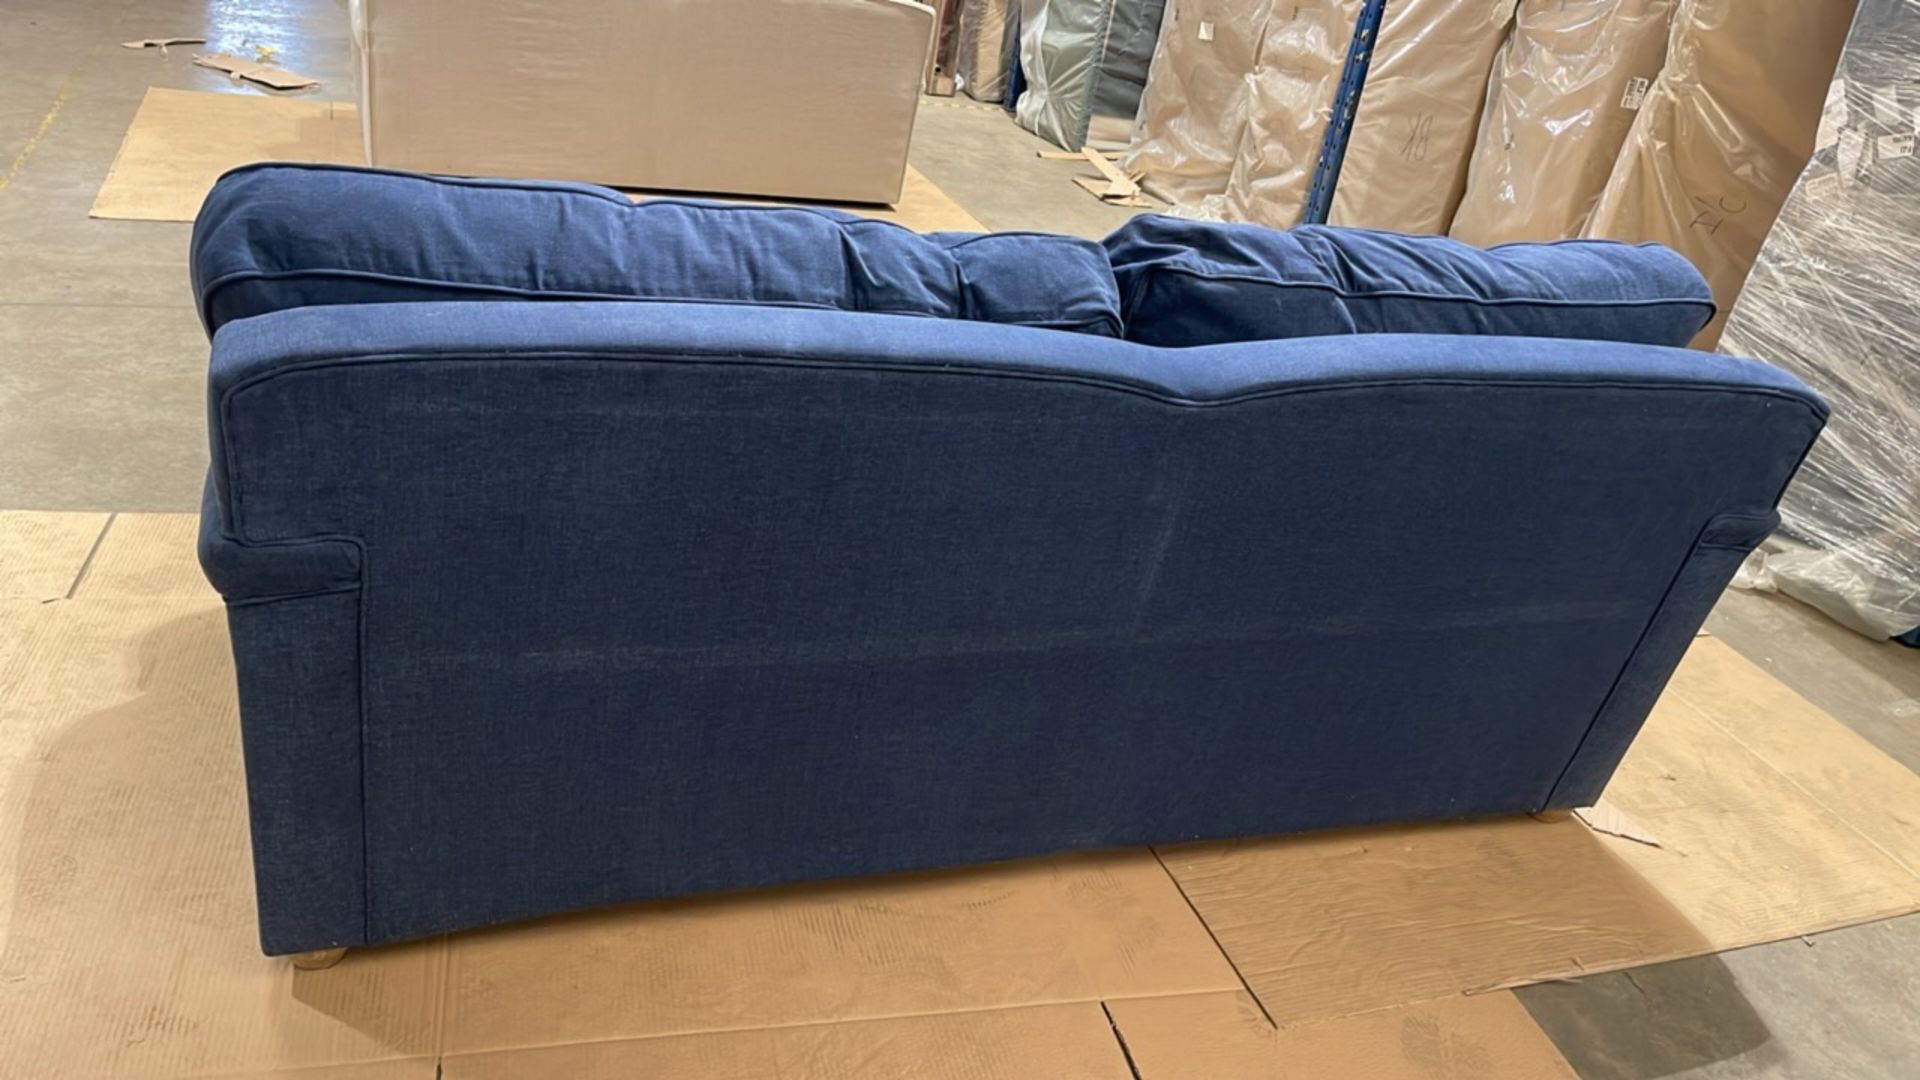 Bluebell Premium Comfort 3 Seat Sofa Bed In Washed Indigo Easy Cotton RRP - £3050 - Image 4 of 4